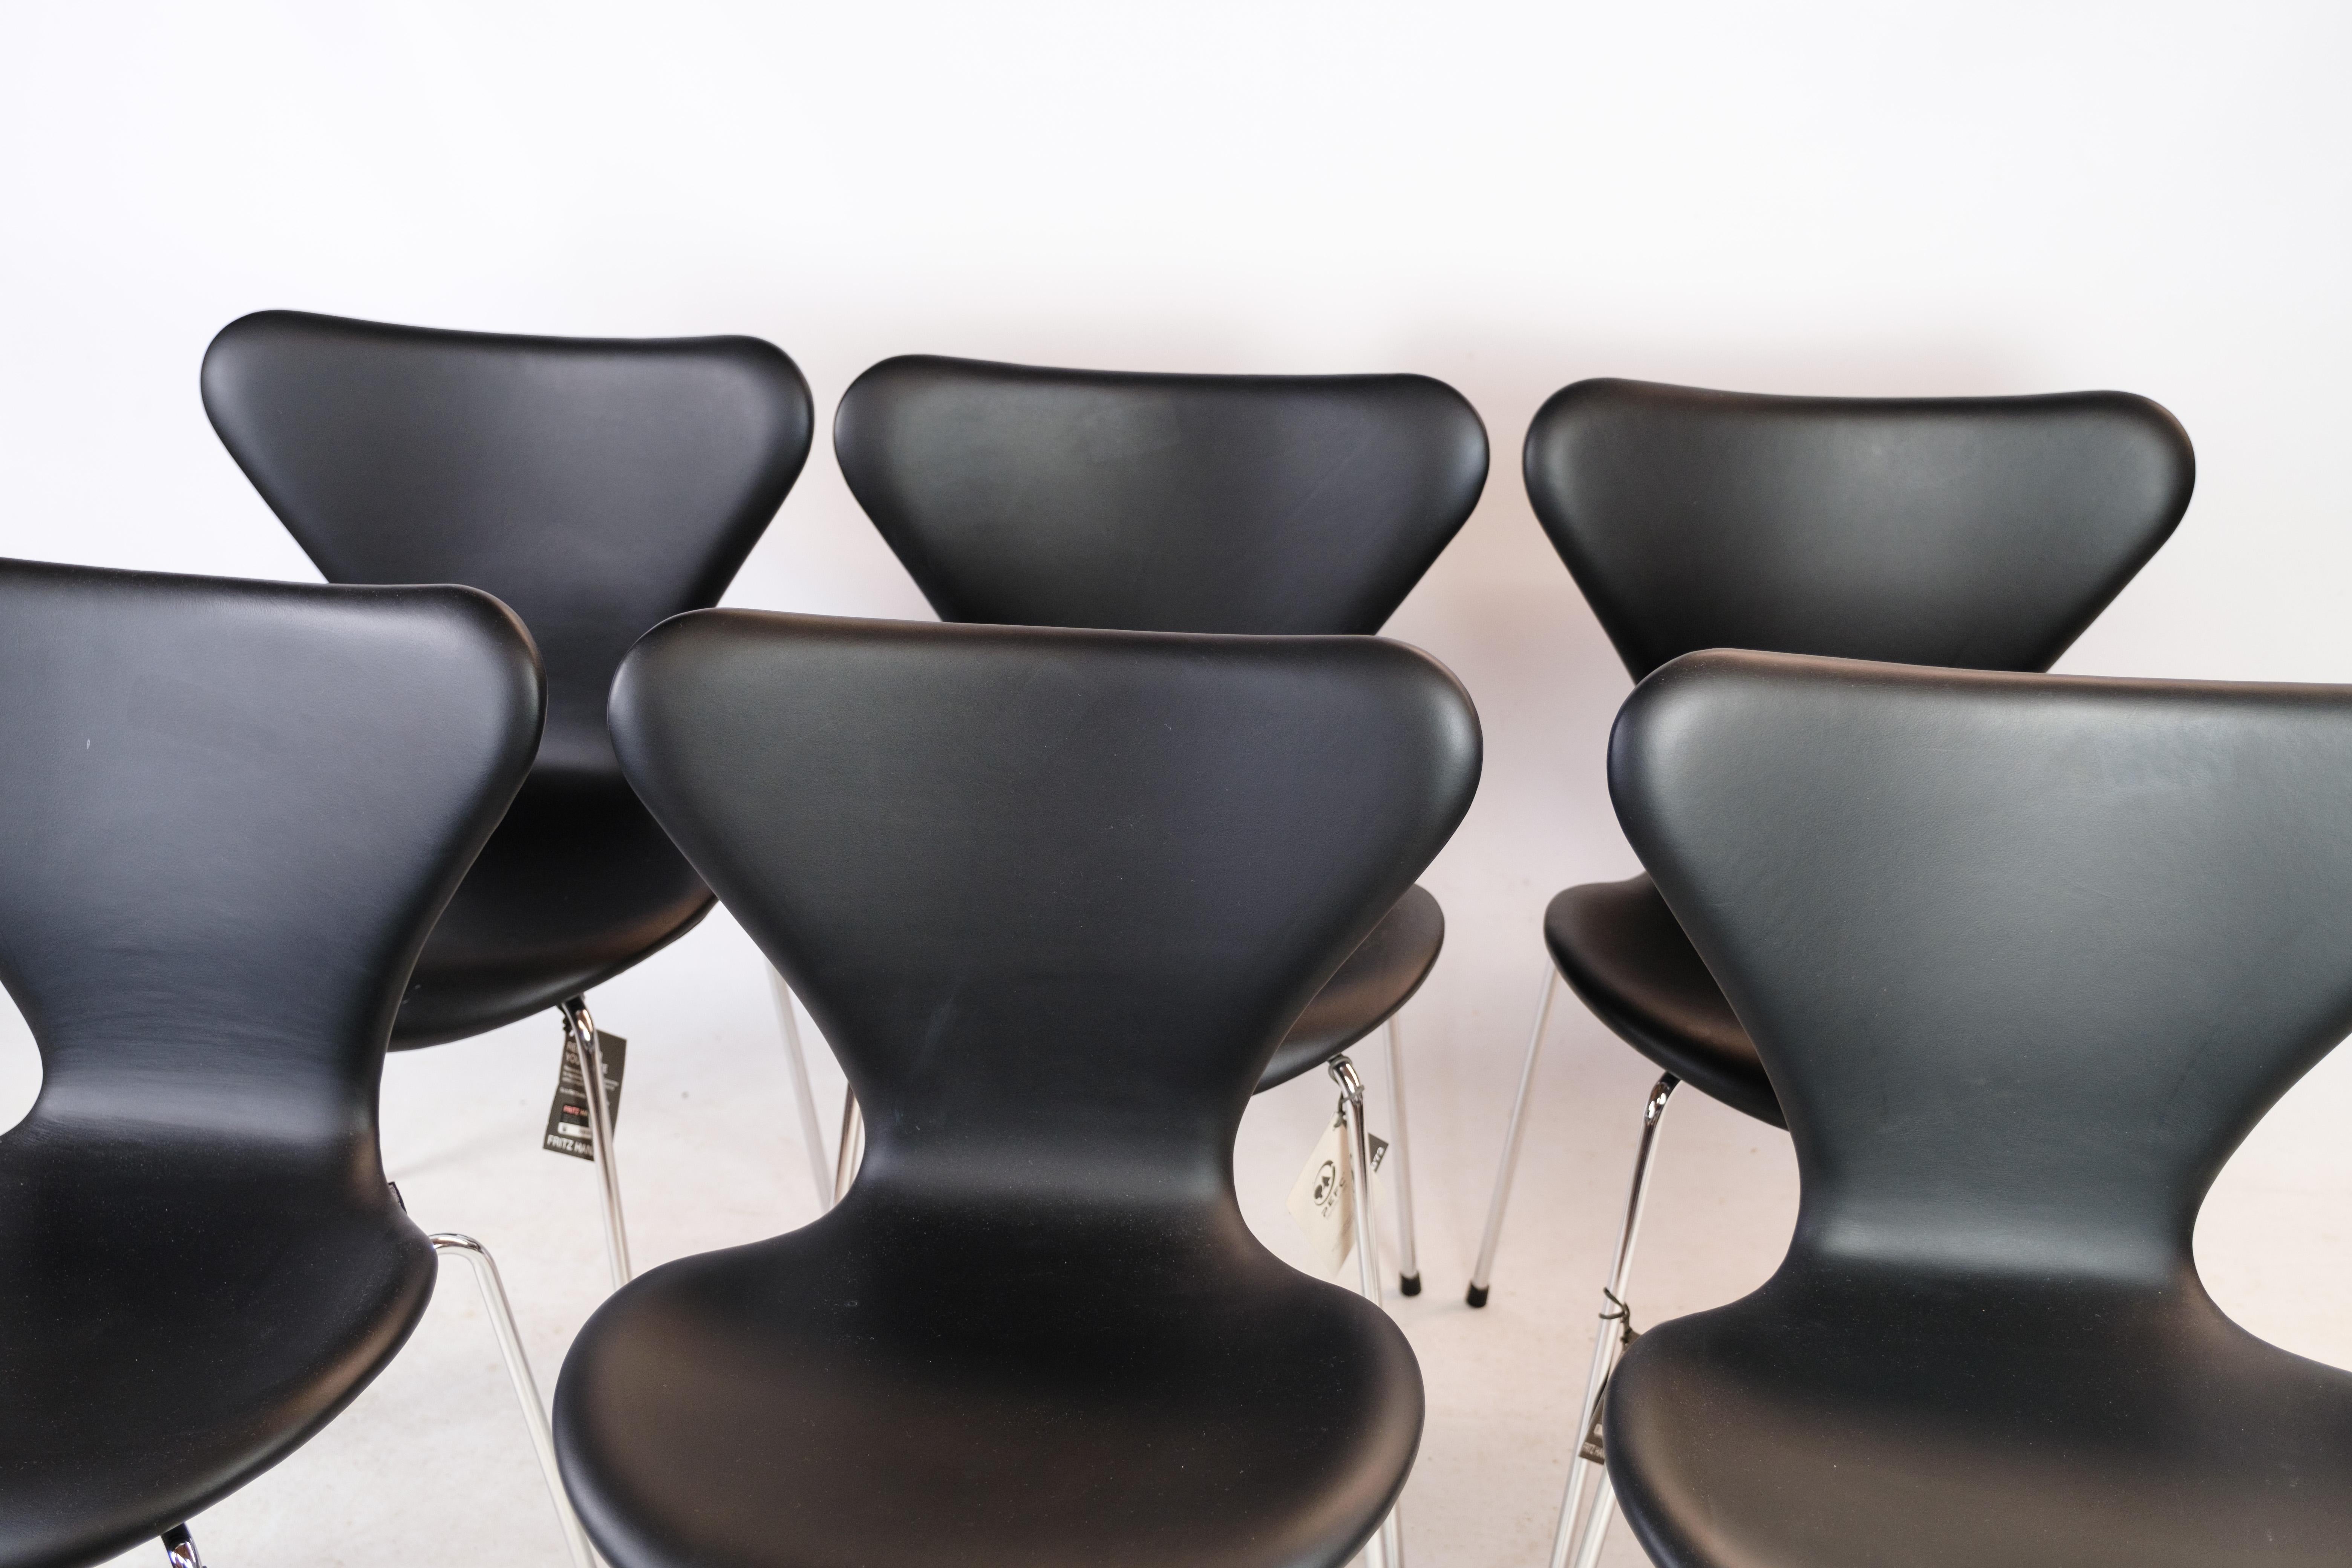 The set of 6 Seven chairs, also known as model 3107, was designed by the Danish architect and designer Arne Jacobsen in 1967 and manufactured by Fritz Hansen. Considered to be one of Jacobsen's most iconic designs, these chairs are a classic example